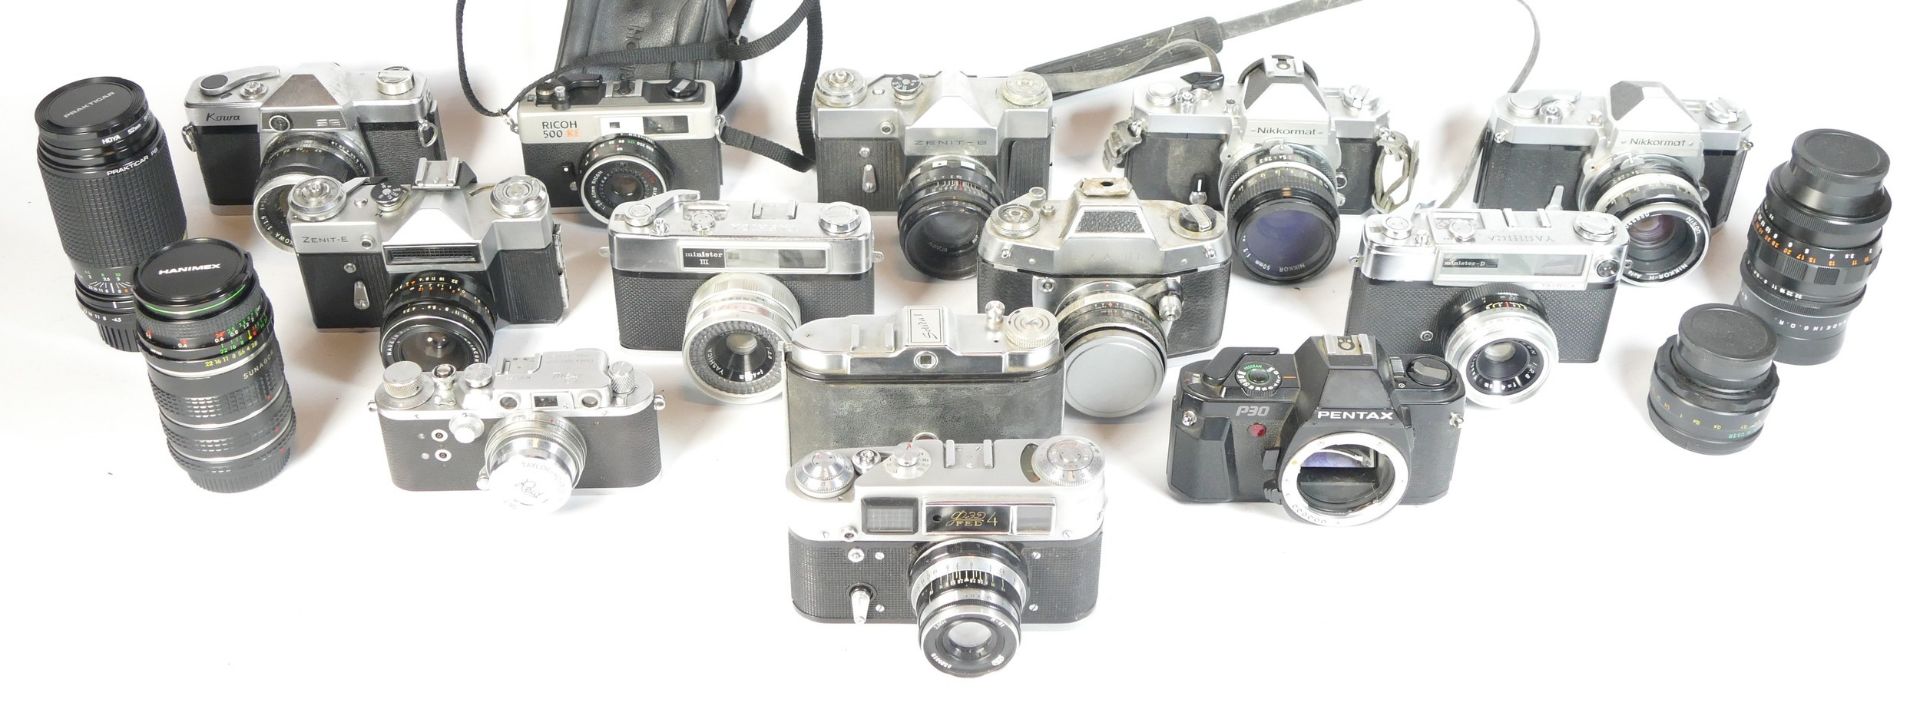 Thirteen SLR vintage film cameras to include a Zenit B, an EXA IIb, a Kowa SE, and a Ricoh 500RF.